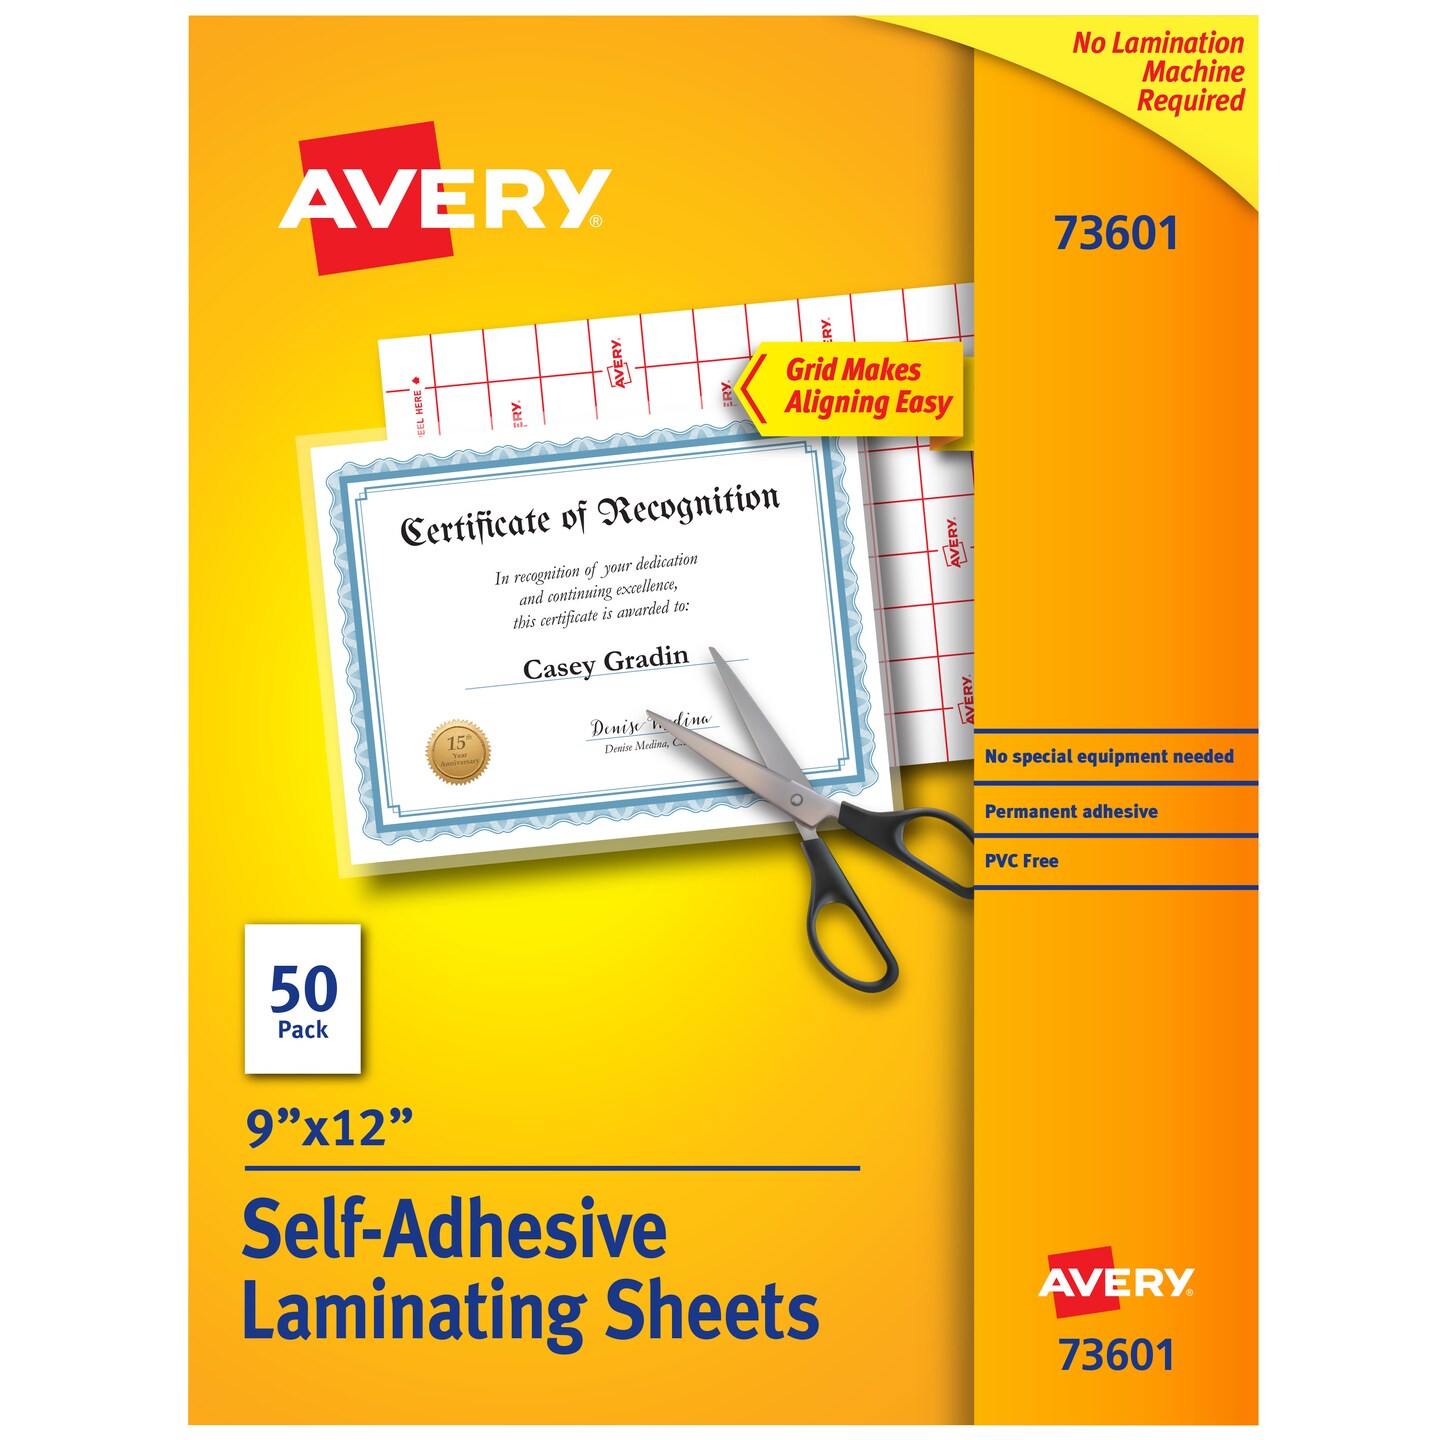 Avery Clear Laminating Sheets, 9 x 12, Permanent Self-Adhesive, 2 Packs,  100 Self-Laminating Sheets Total (46043)